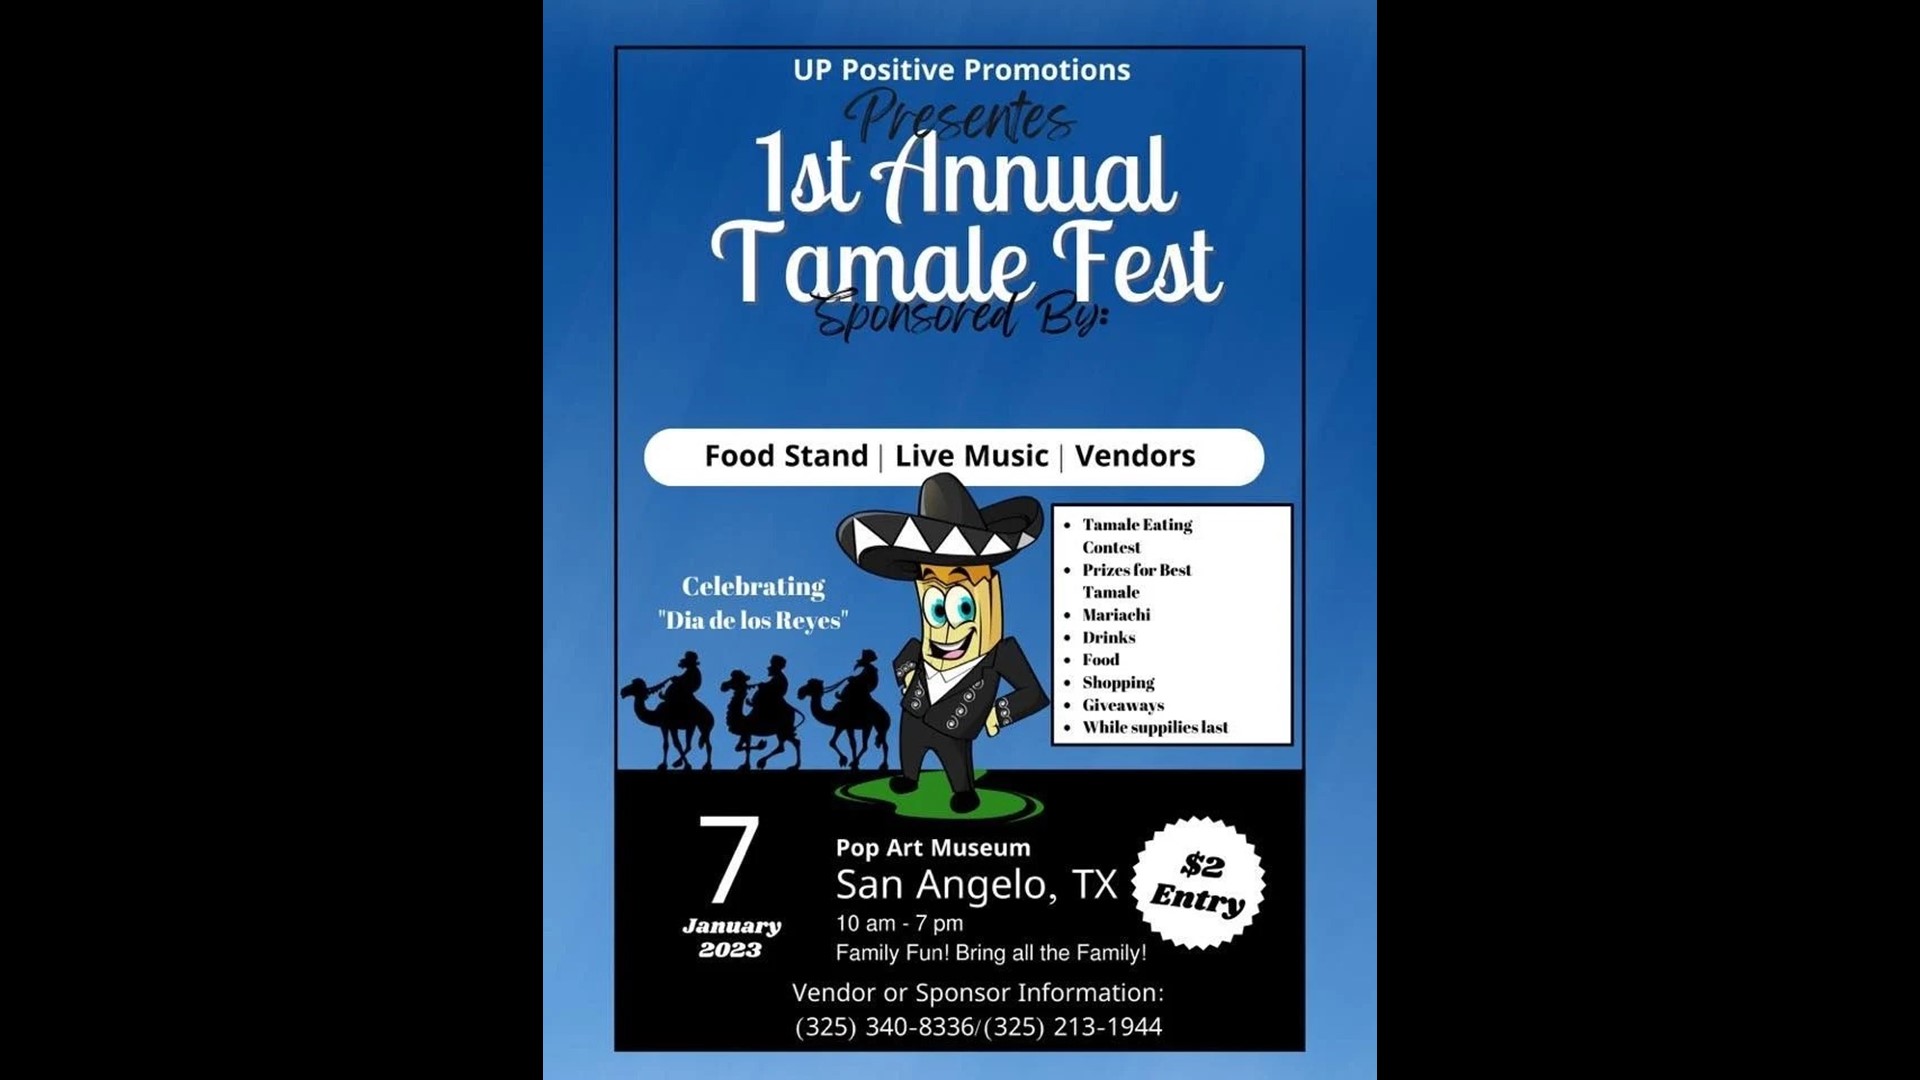 The Tamale Fest not only welcomes local San Angelo residents best dishes, but clothing and live music as well.